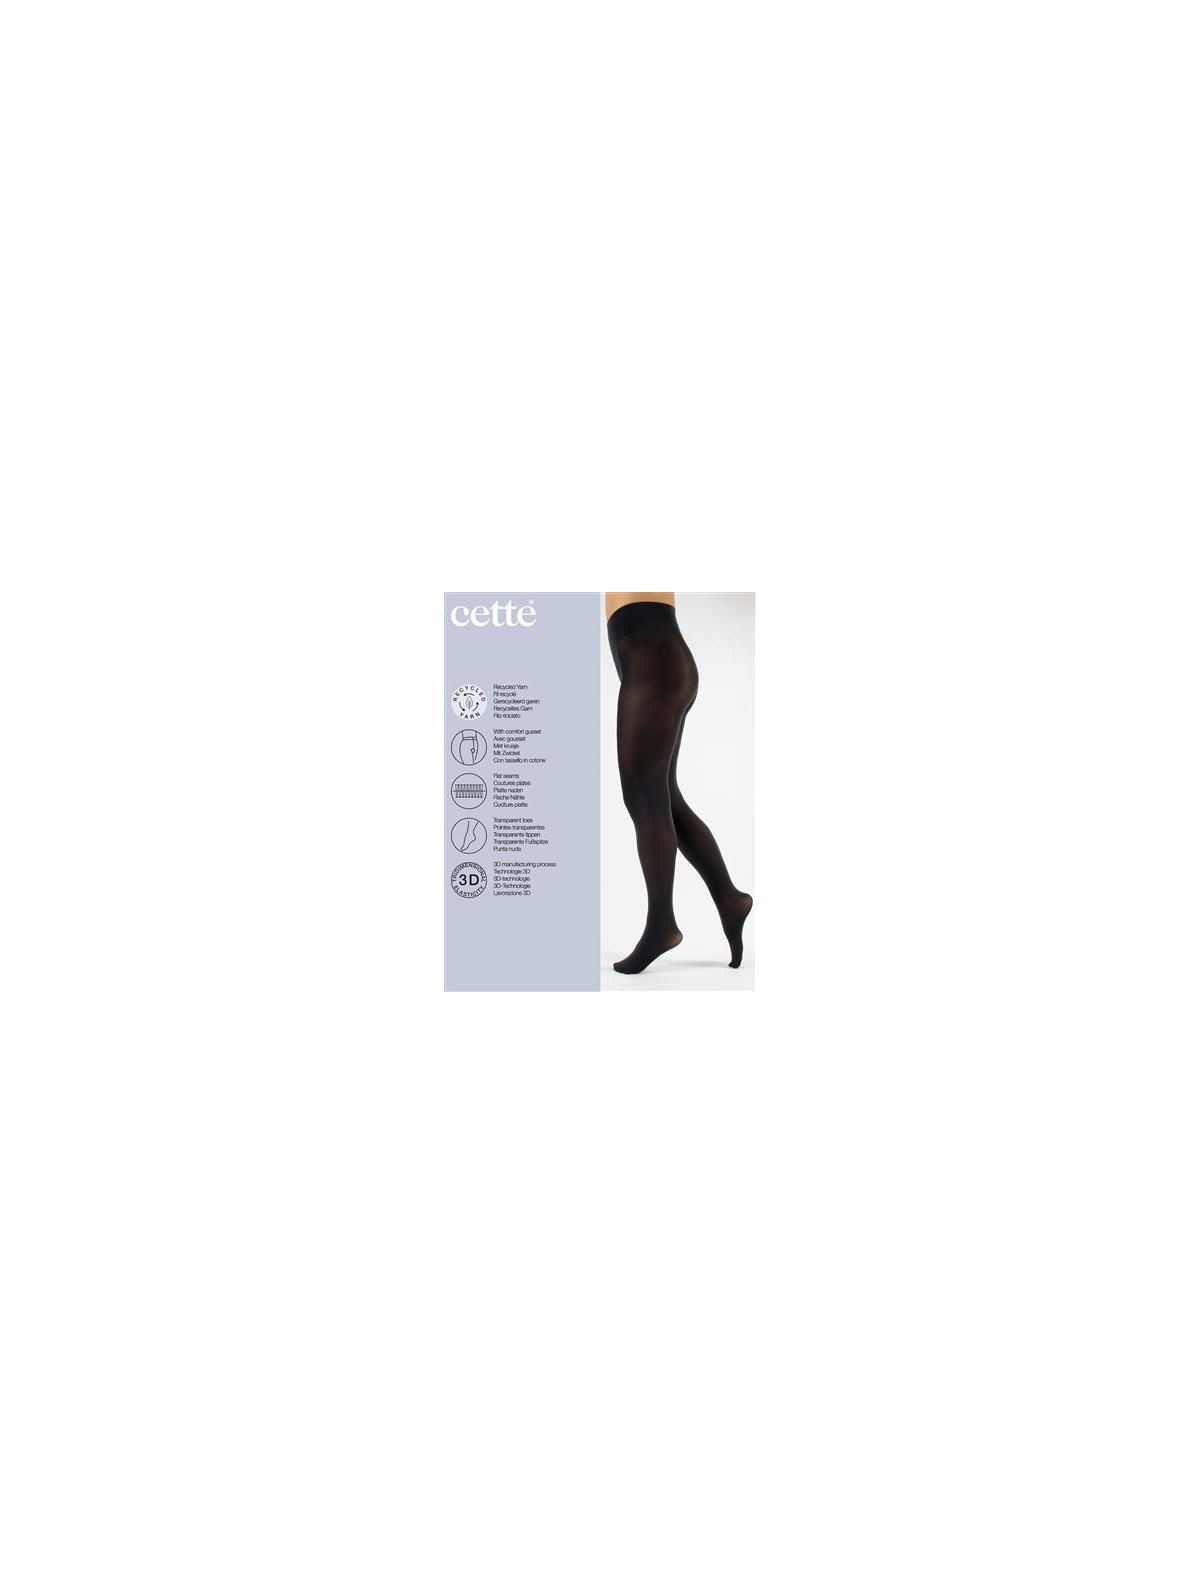 Cette DUBLIN ECO - Recycled Yarn Comfy Tights